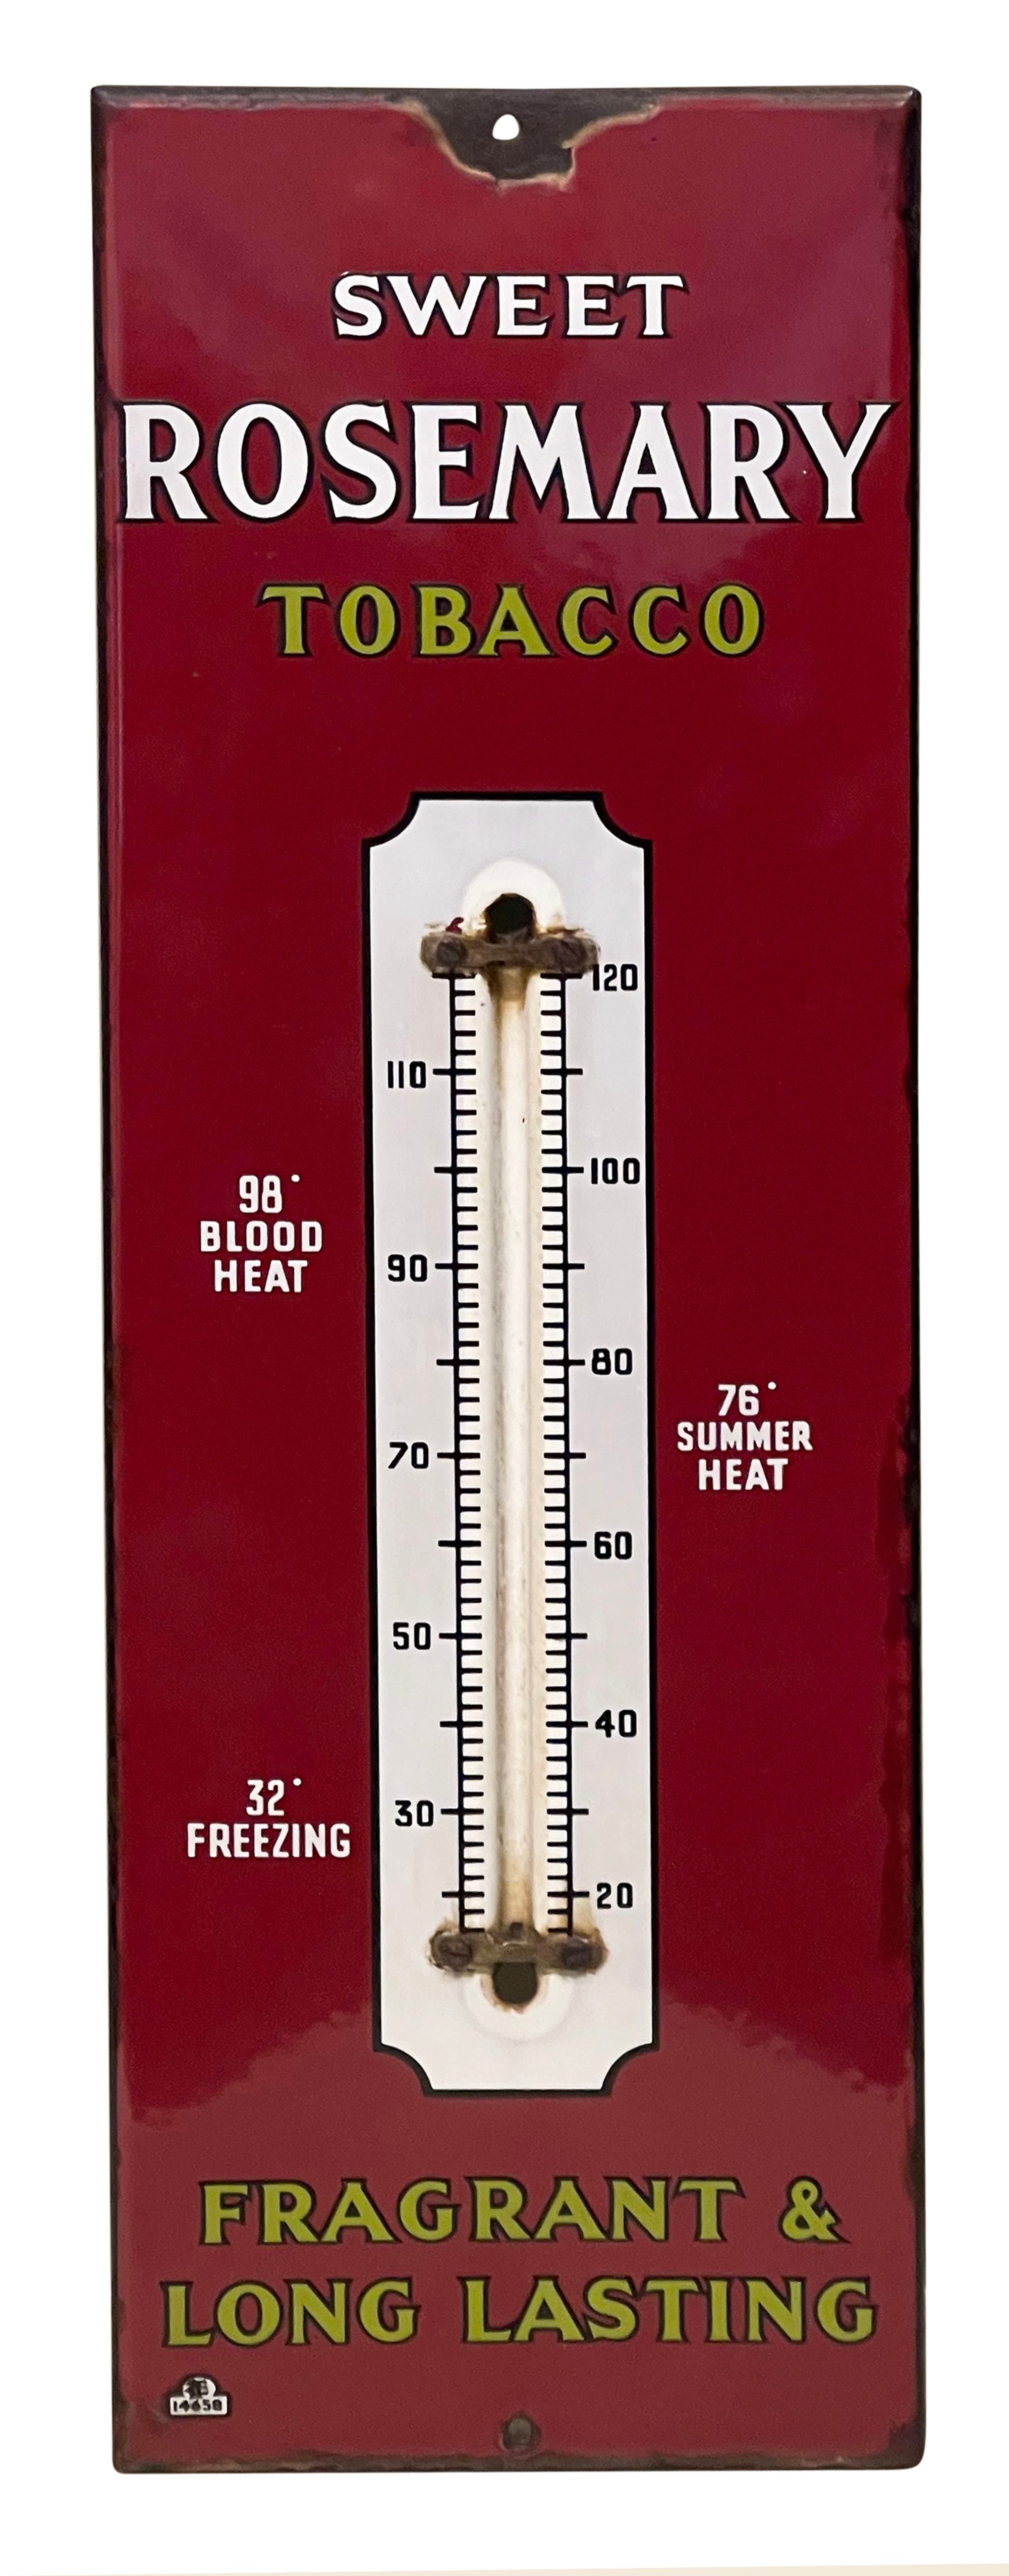 Advertising. Sweet Rosemary Tobacco enamel wall thermometer sign